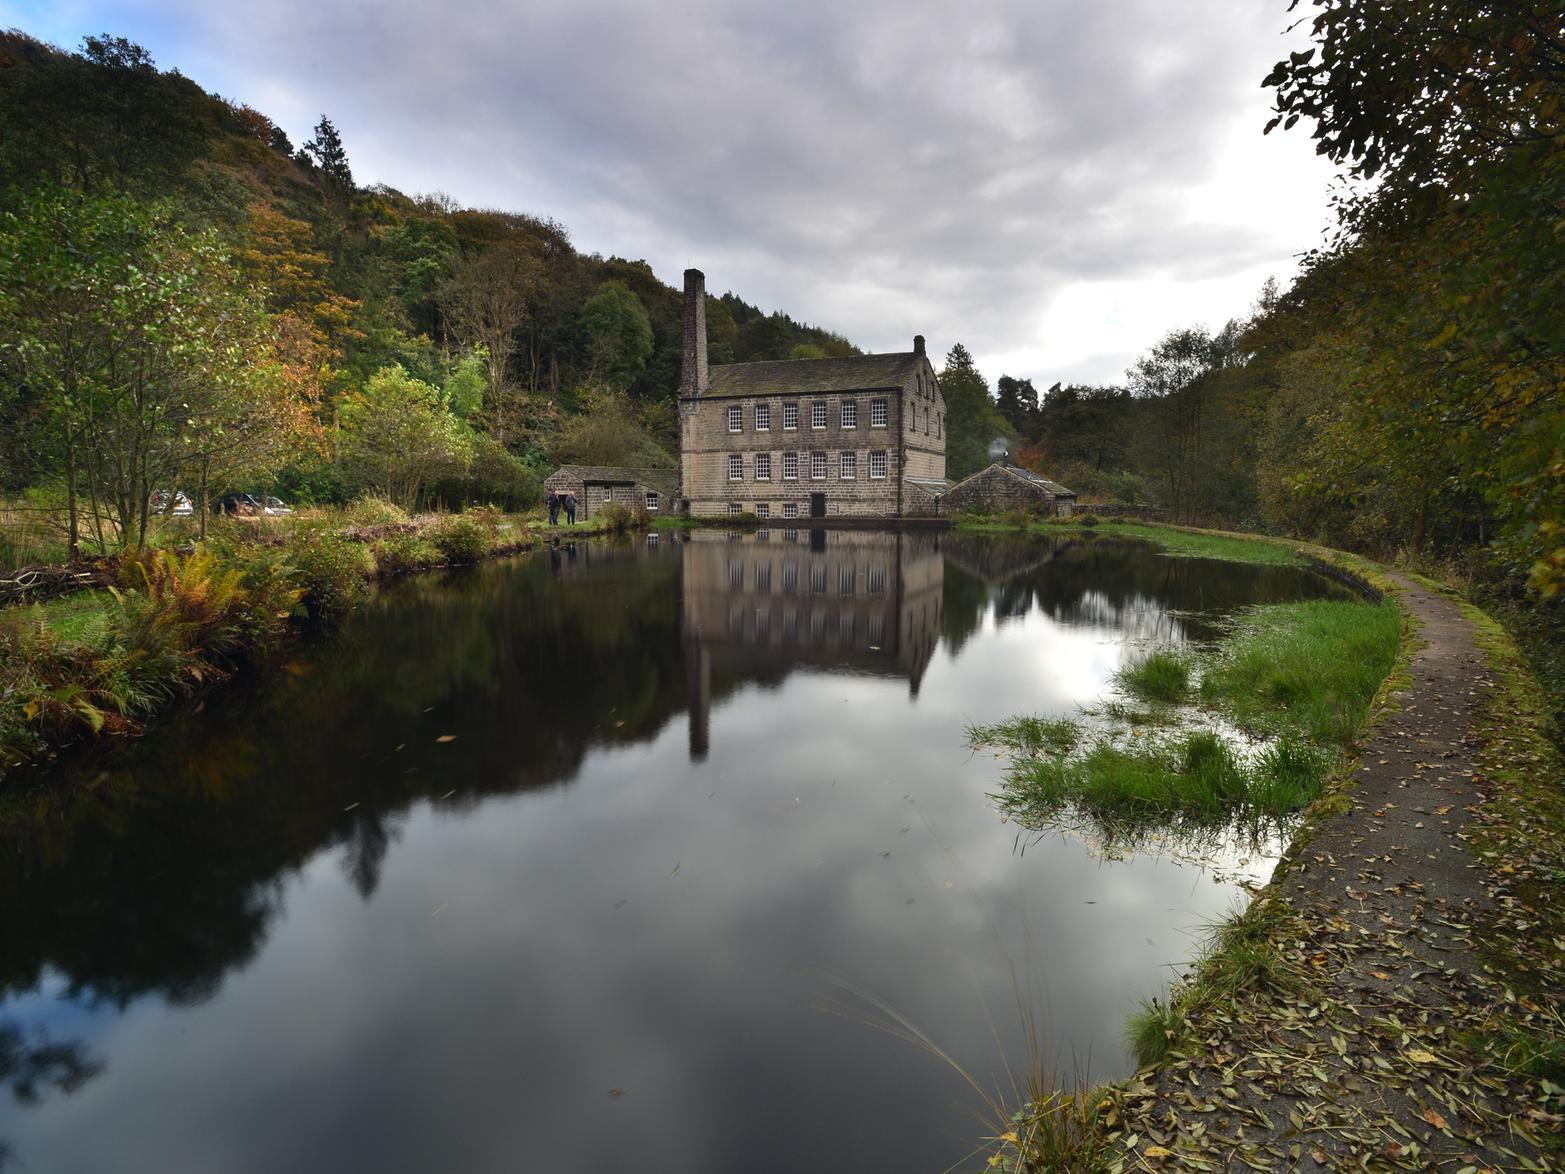 Hardcastle Crags near Hebden Bridge is a great place to spend the day with paths and beautiful woodeed areas to explore as well as the chance to visit the historic Gibson Mill. The property is owned by the National Trust.